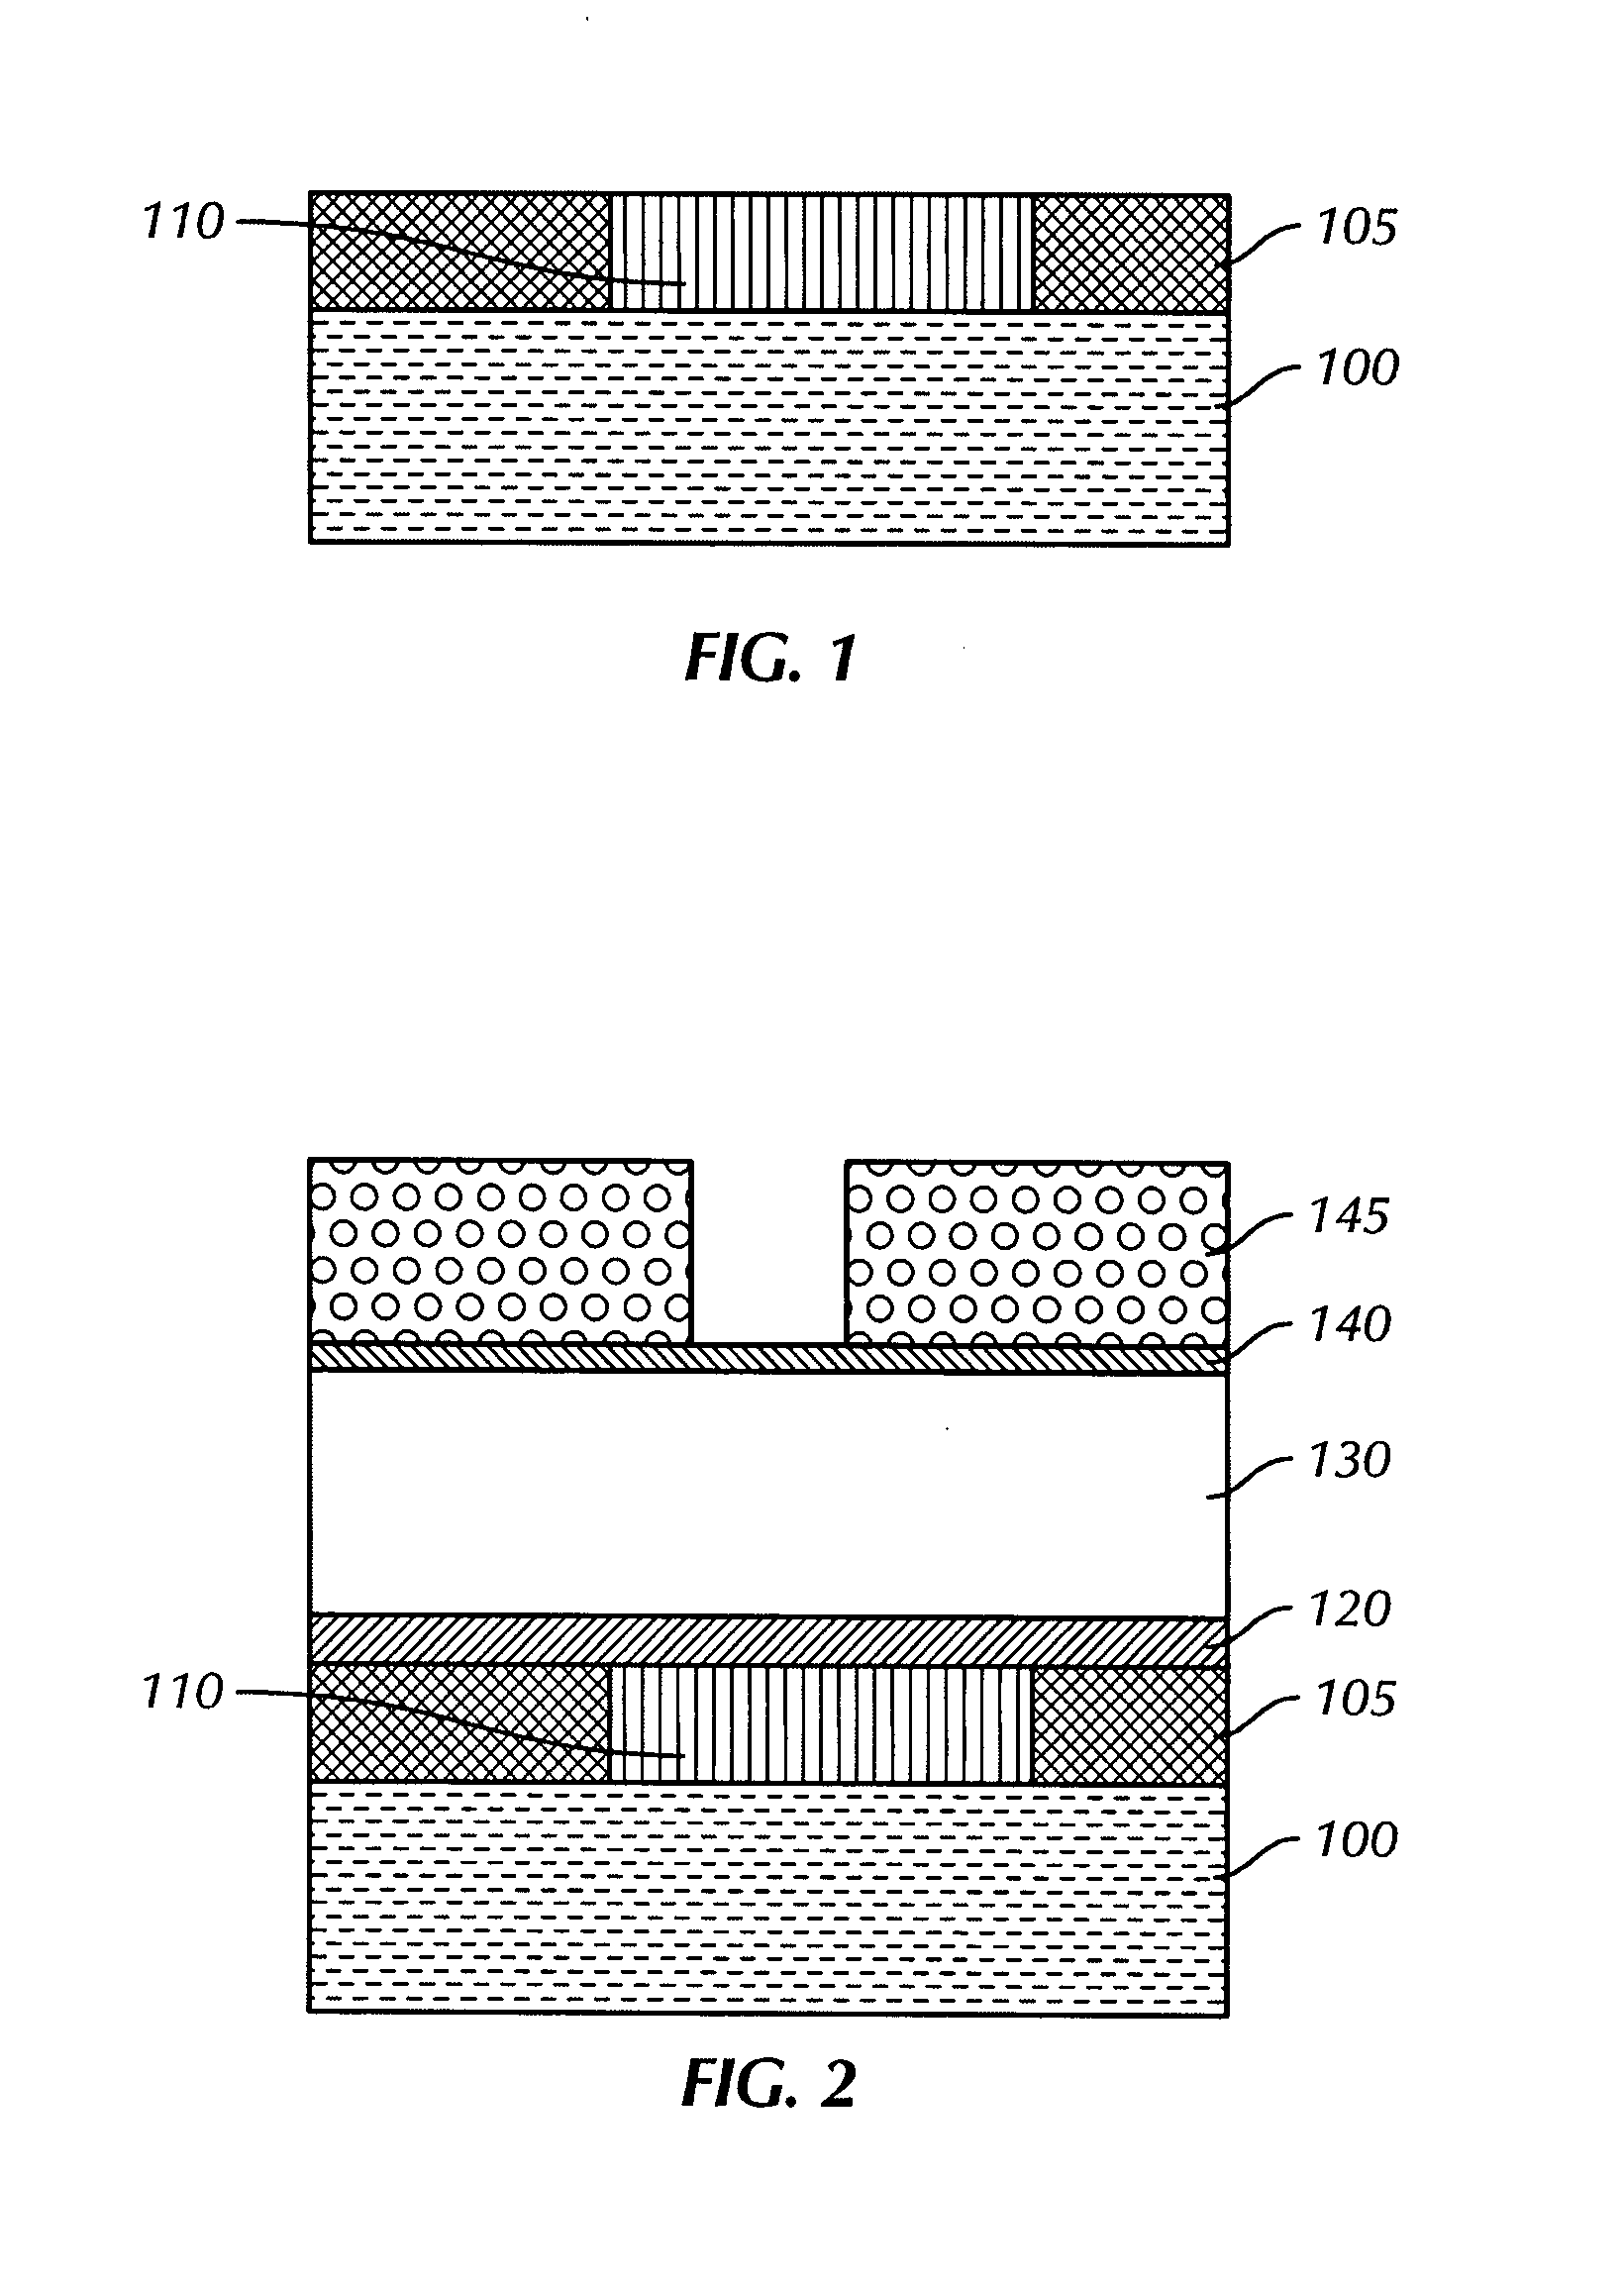 Cobalt tungsten phosphate used to fill voids arising in a copper metallization process